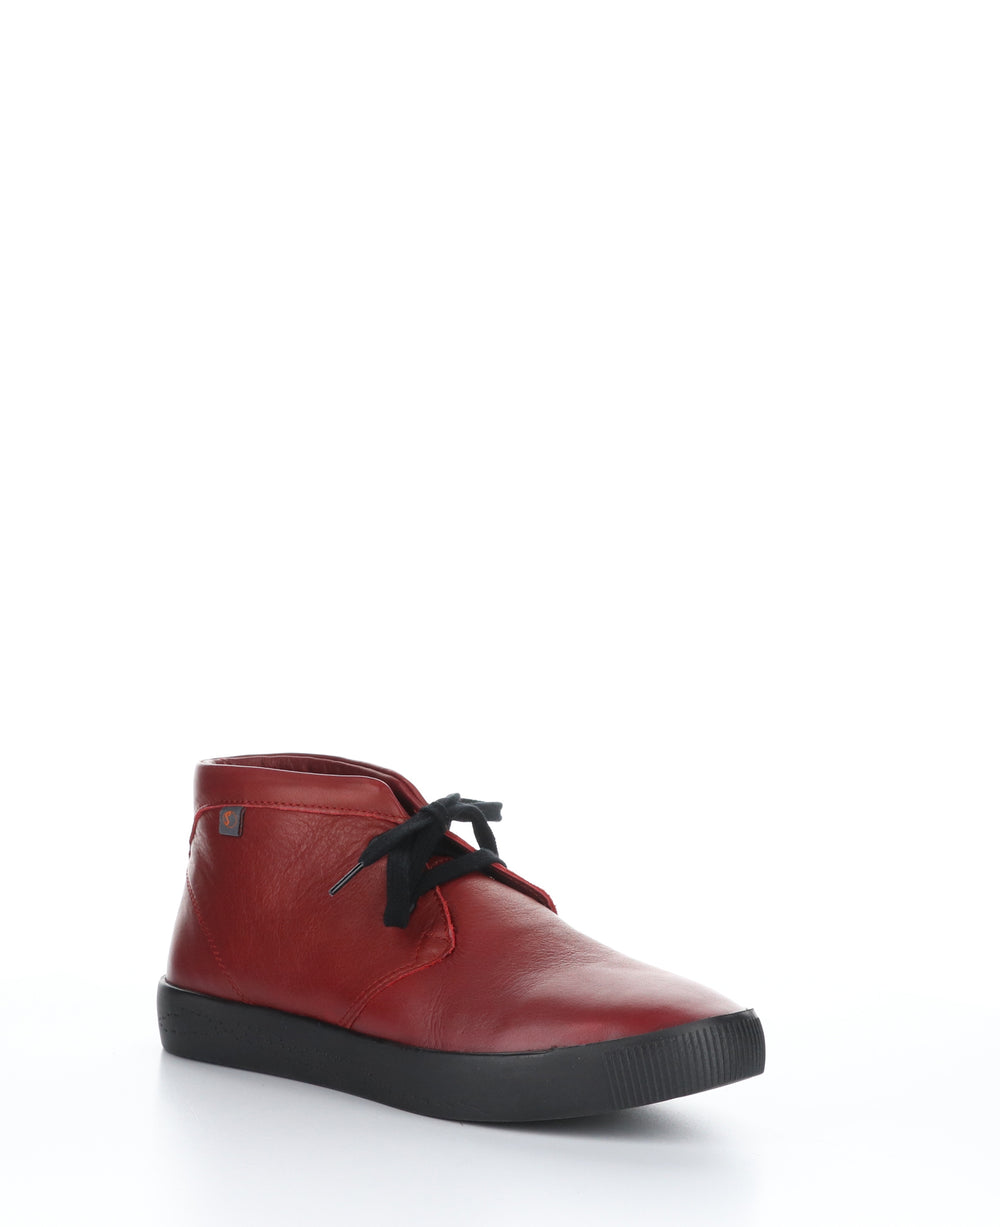 SIAL607SOF Red Round Toe Shoes